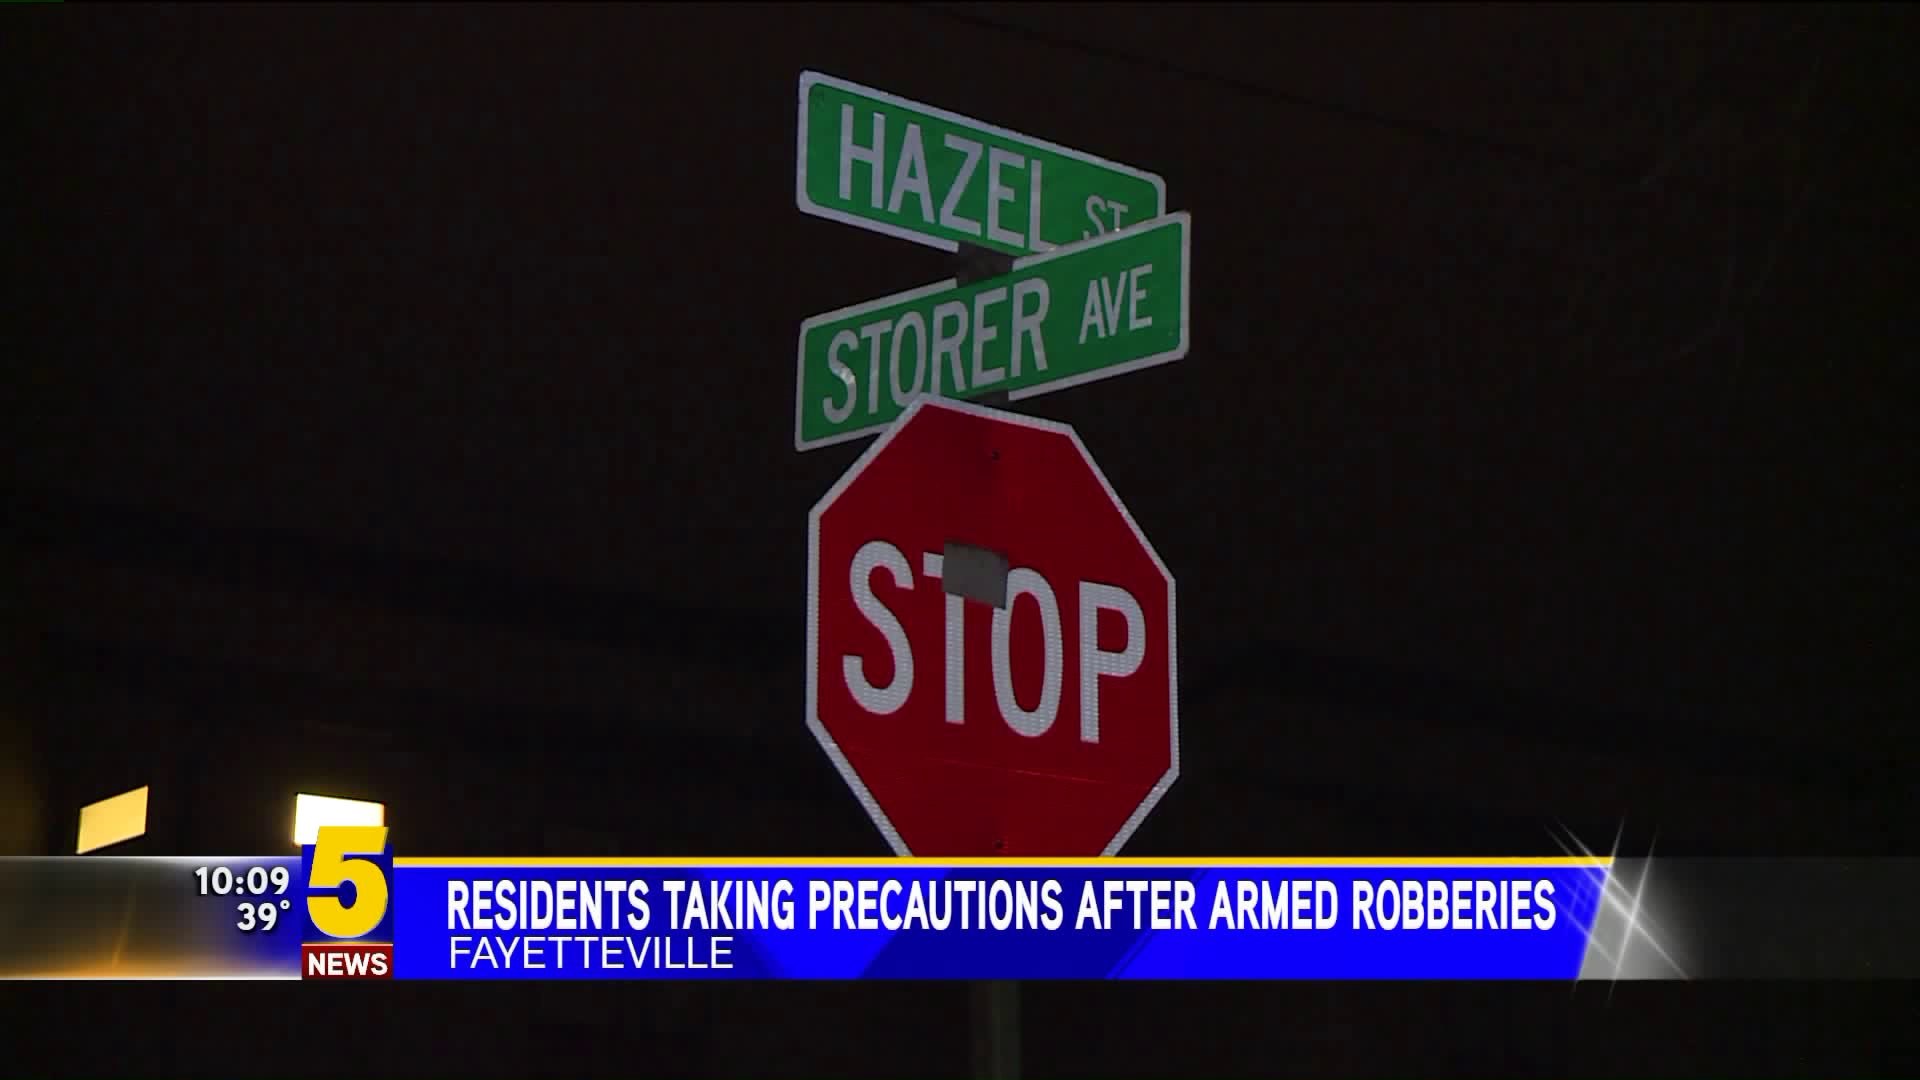 Residents taking precautions after armed robberies in fayetteville